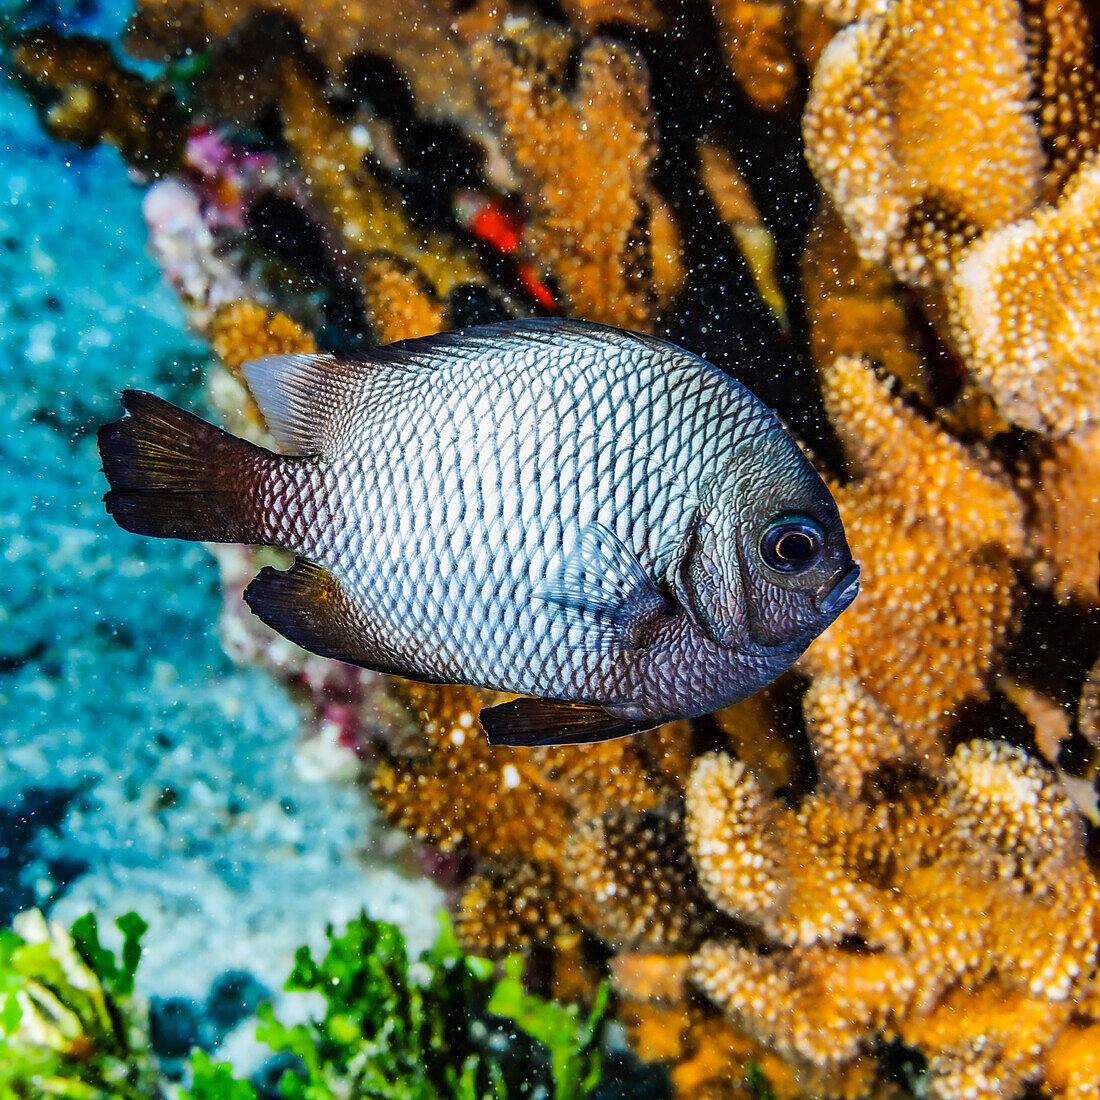 The Hawaiian Dascyllus (Dascyllus albisella) is a Hawaiian endemic fish species. This example was photographed under water while scuba diving near Maui; Molokini Crater, Maui, Hawaii, United States of America